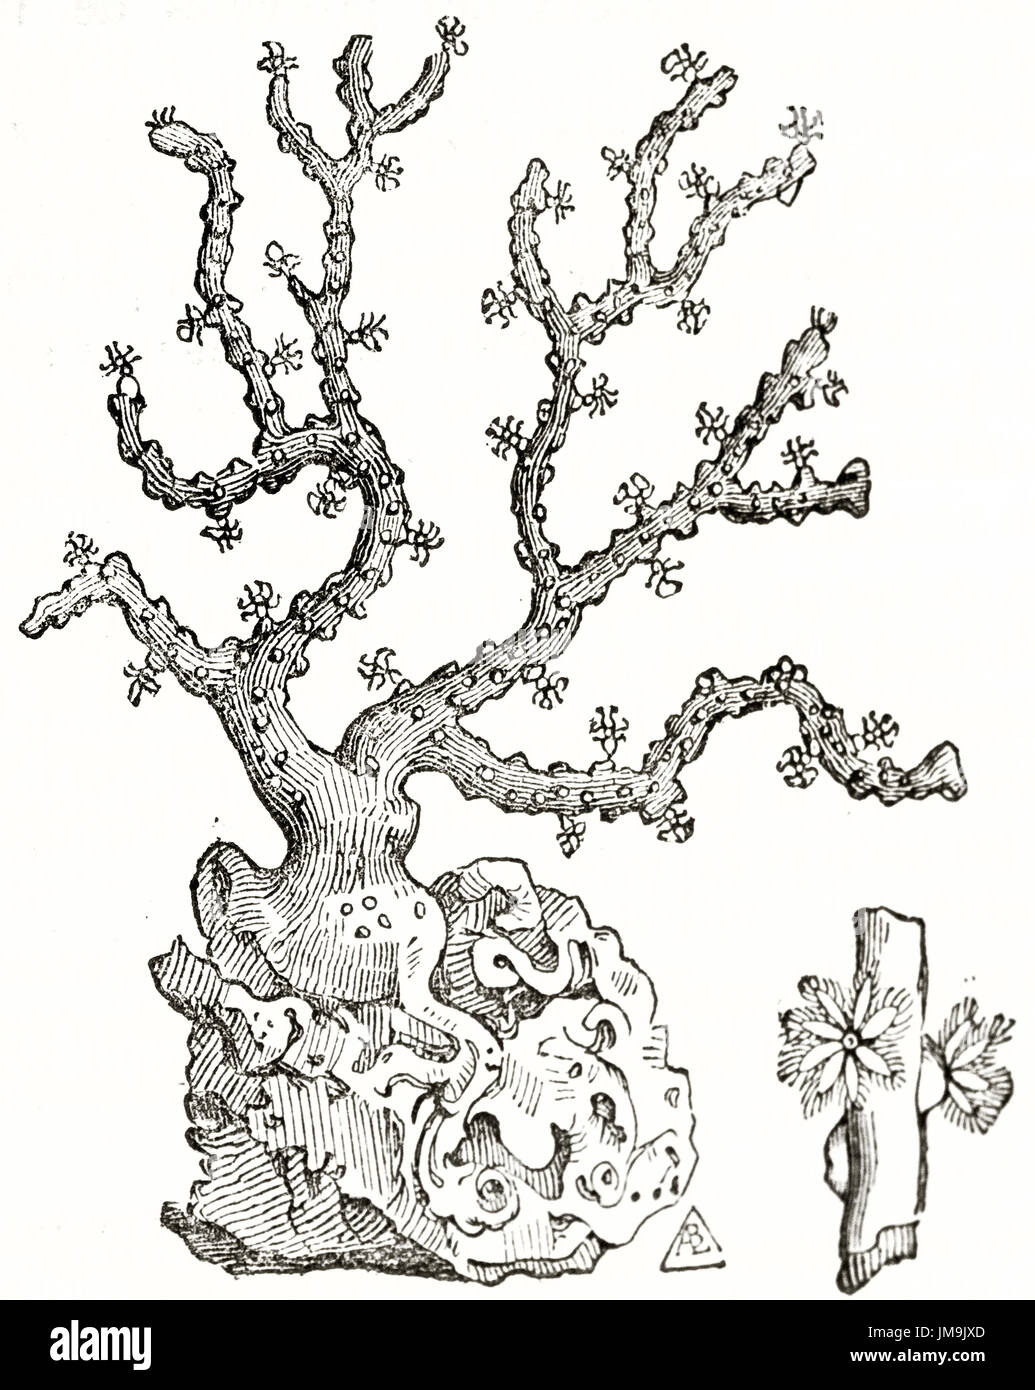 Old illustration of branch coral. By unidentified author, published on Magasin Pittoresque, Paris, 1837 Stock Photo